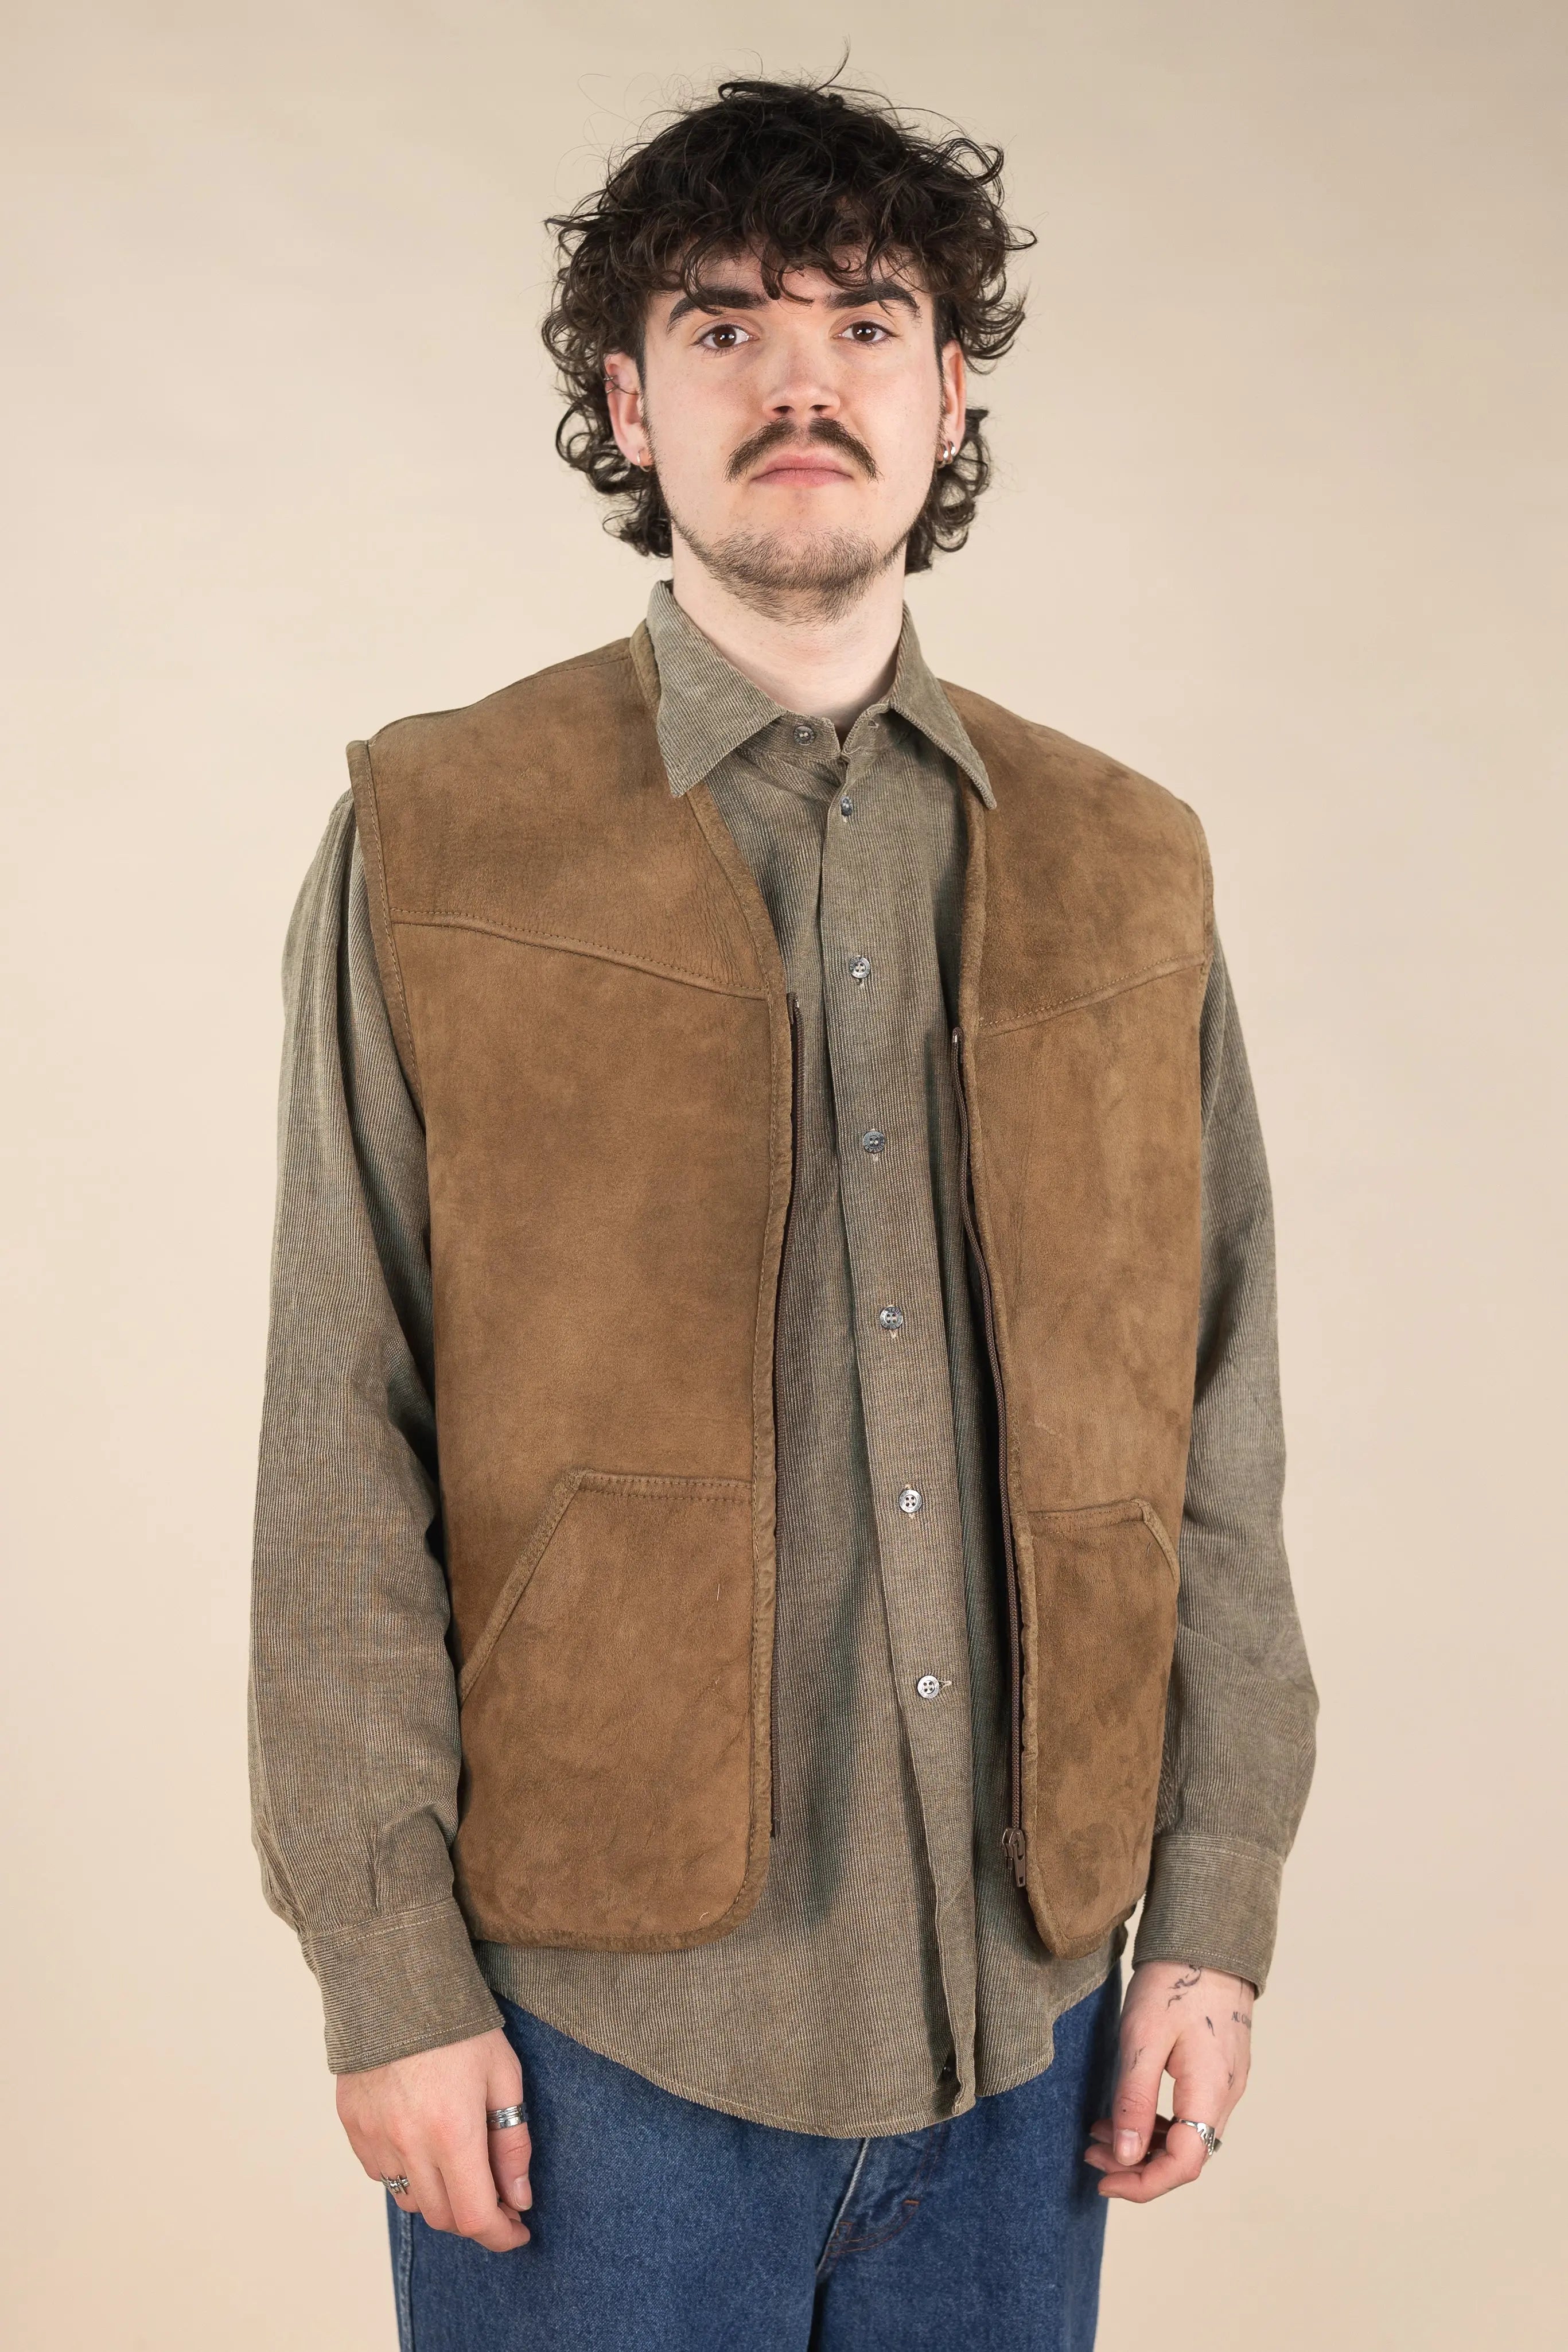 Unknown - Leather Waistcoat- ThriftTale.com - Vintage and second handclothing